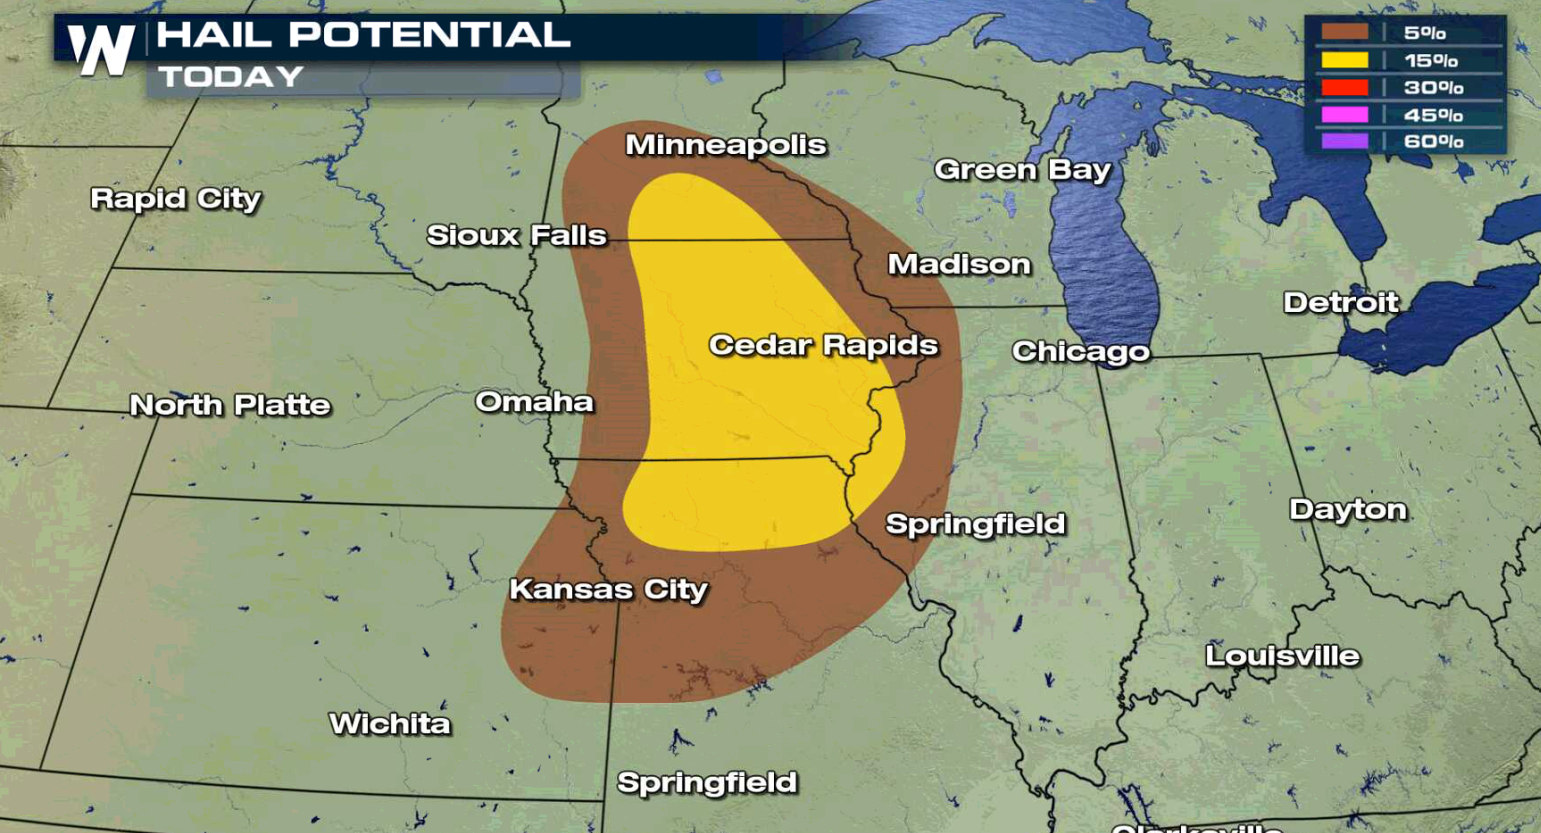 Severe Storms Possible in the Plains and Great Lakes into the Weekend